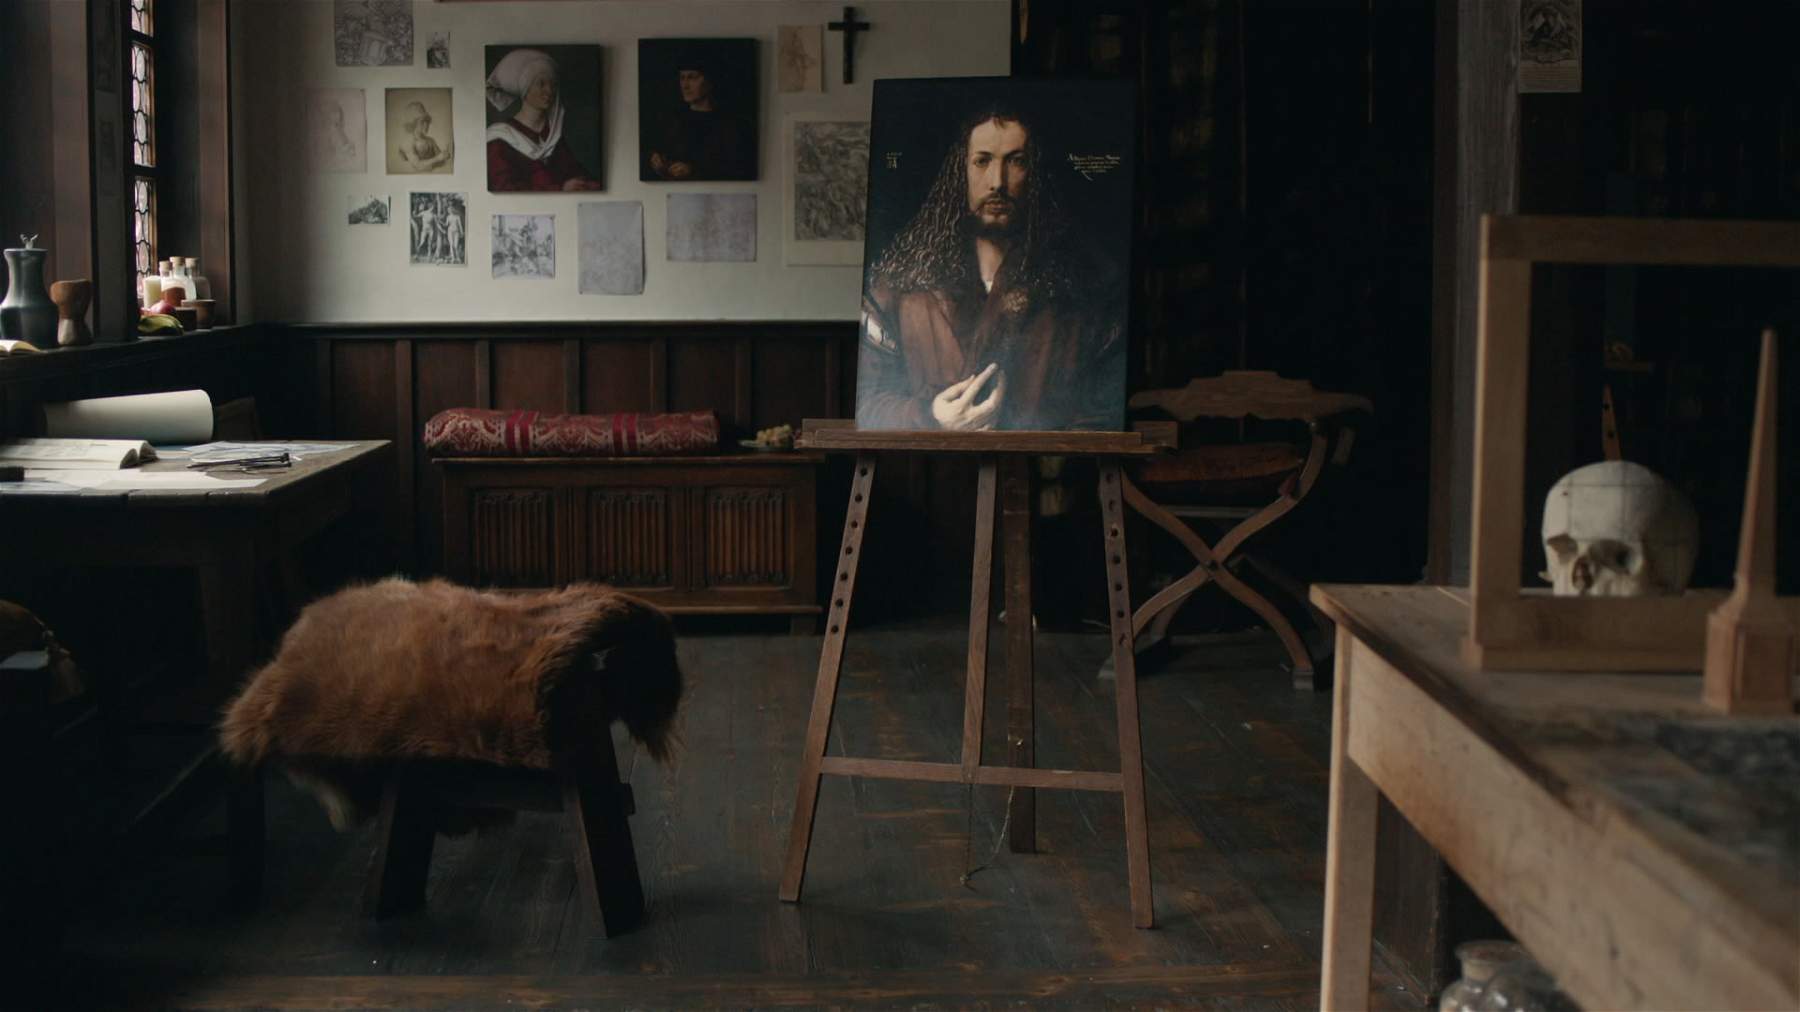 On Rai5 a documentary dedicated to Albrecht DÃ¼rer and his self-portraits